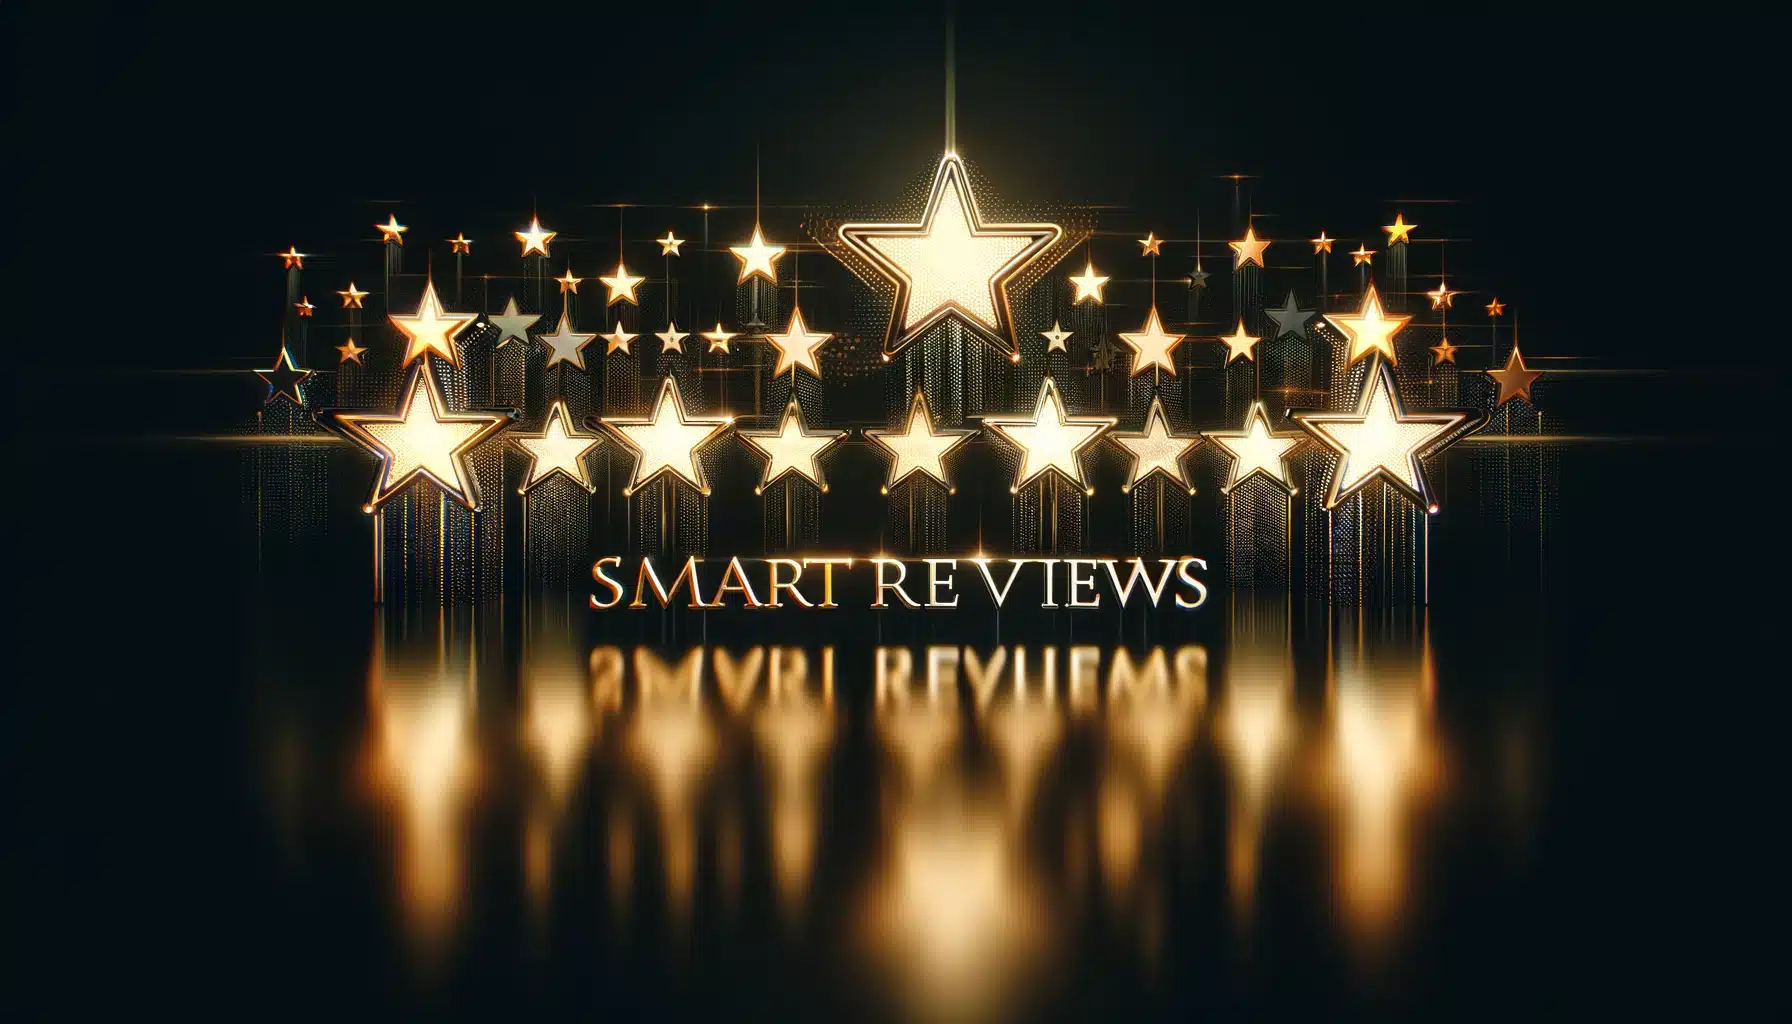 WebJIVE Smart Reviews Software - Manage your online reviews